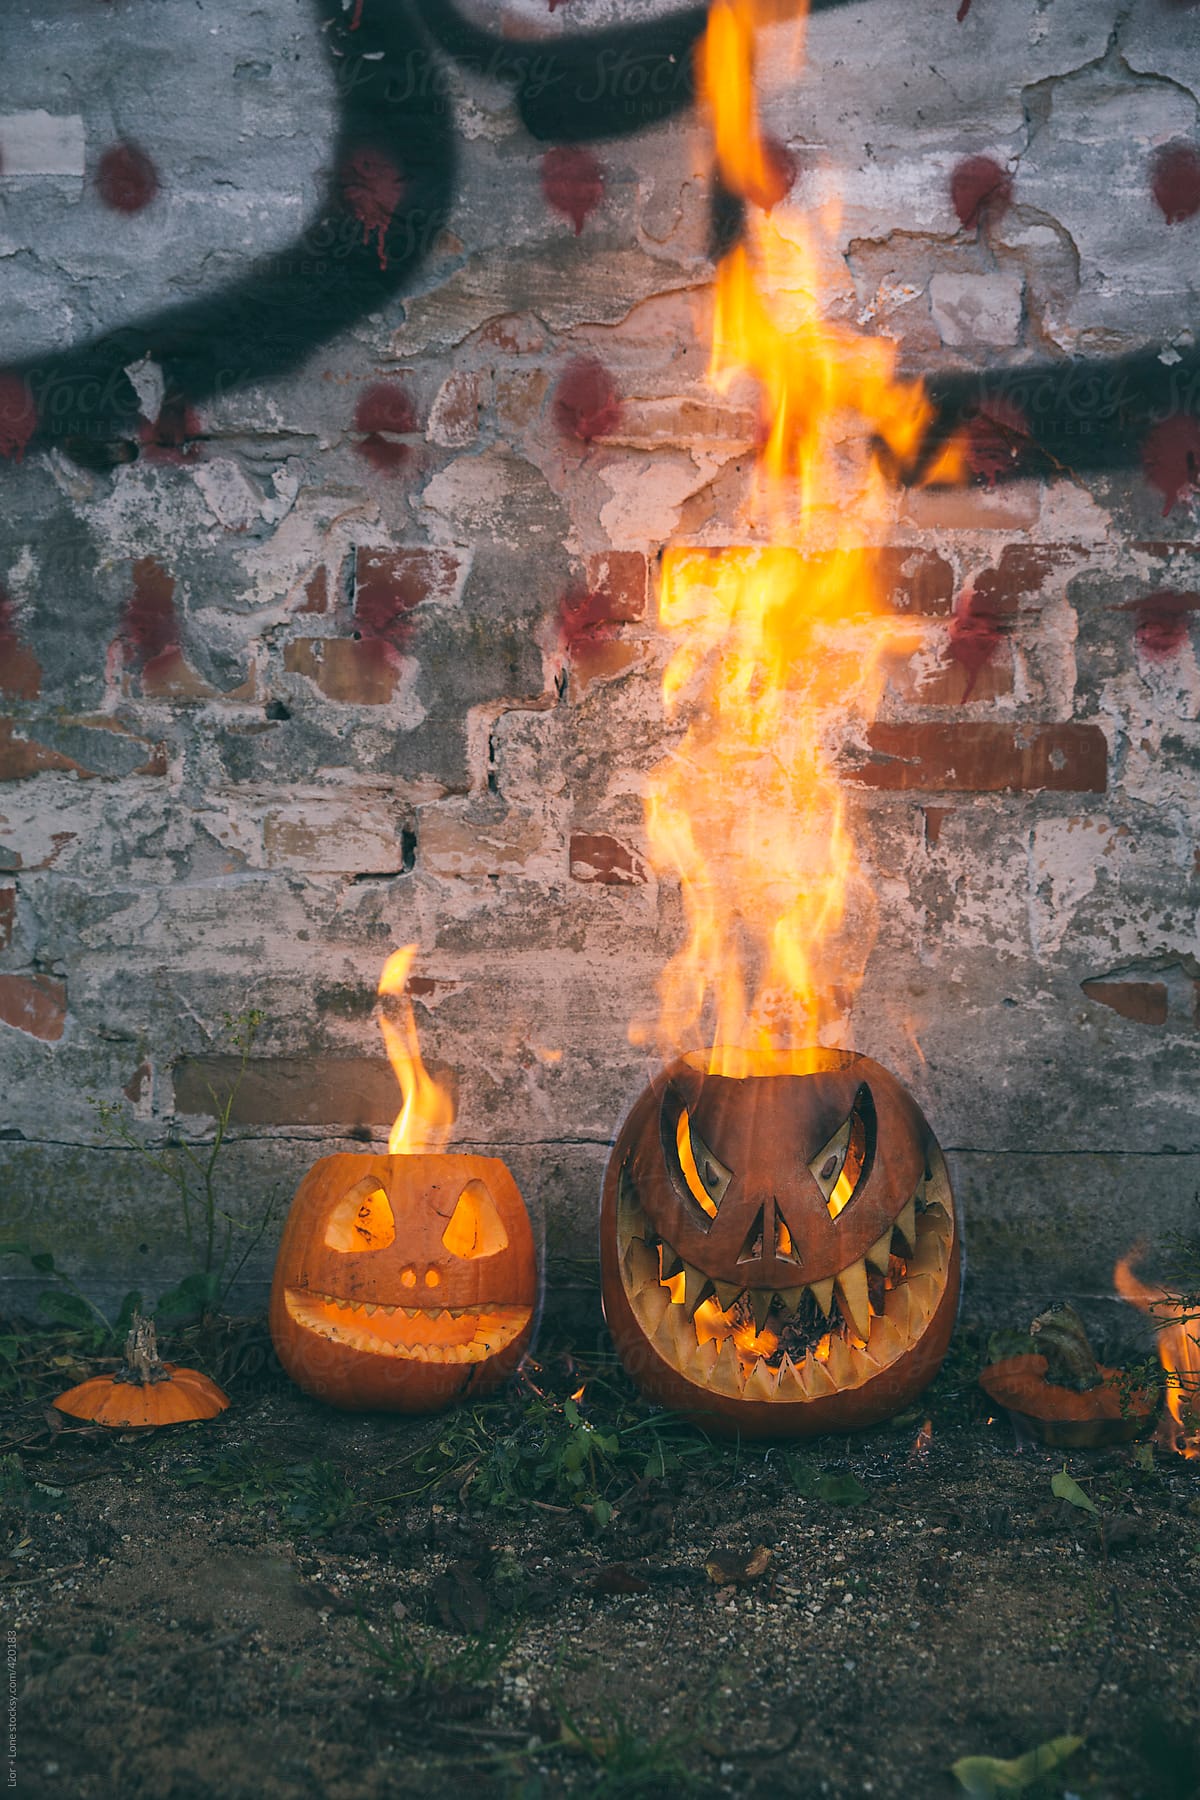 Fire exploding from two Halloween pumkins placed against brick wall